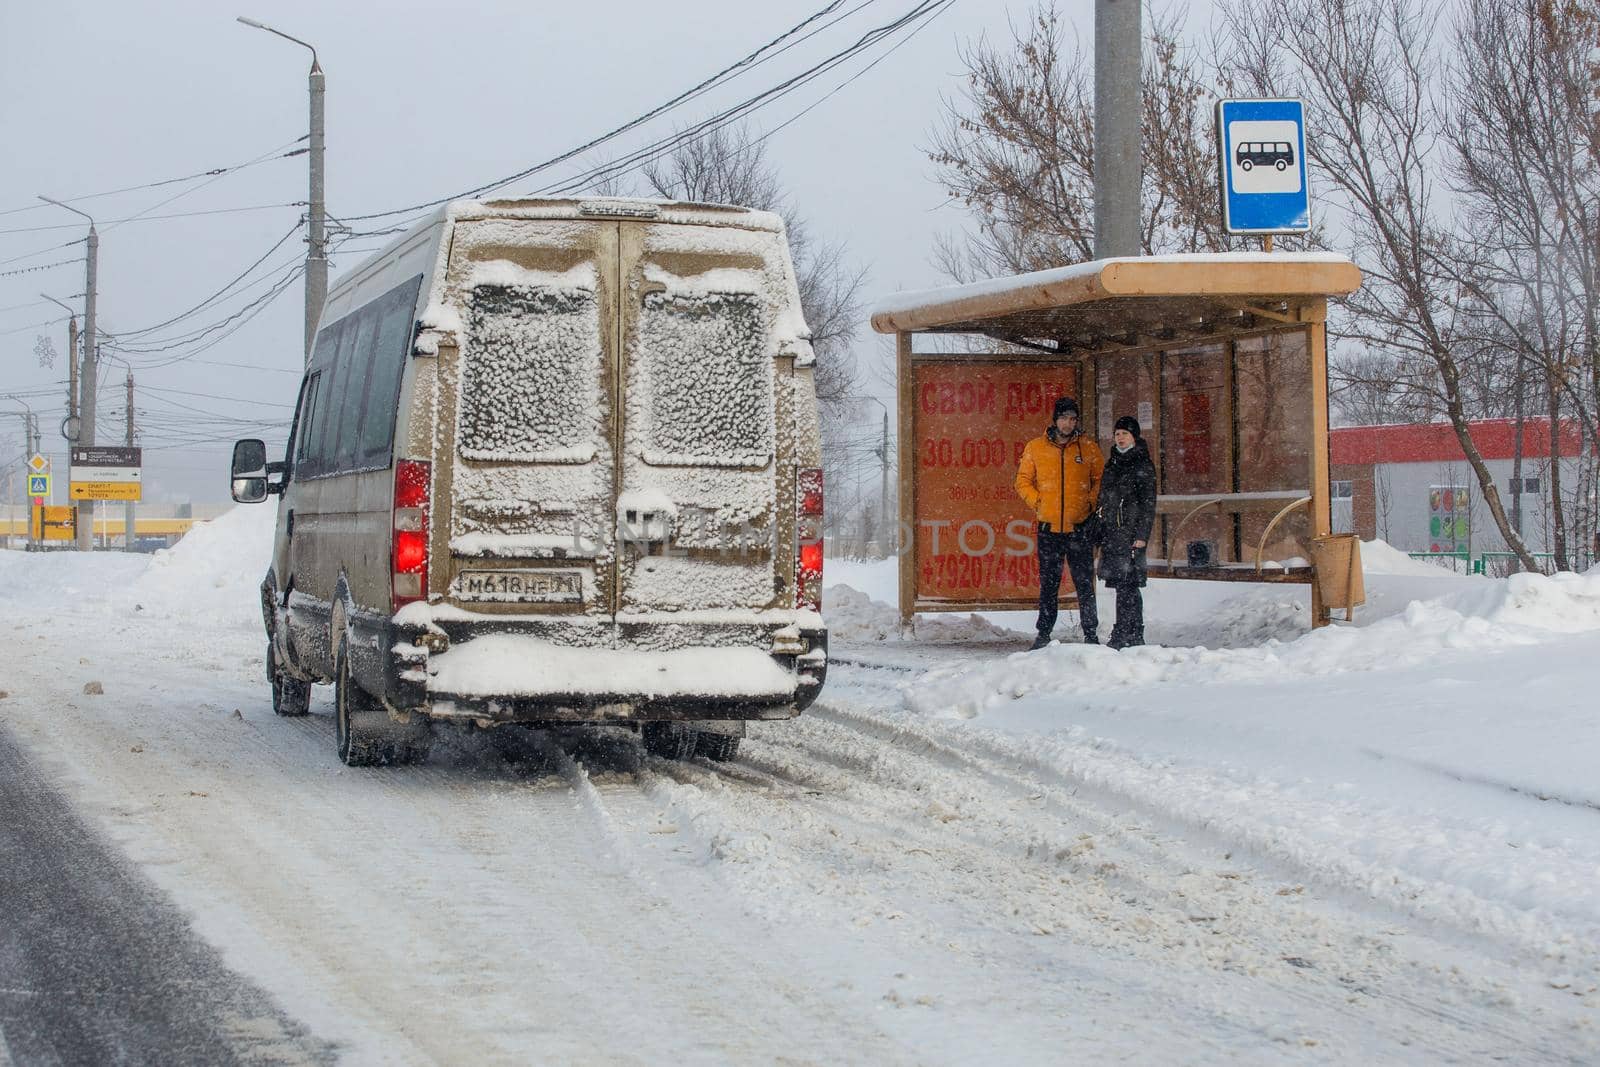 Man and woman waiting transport on bus stop at winter snowy day in Tula, Russia by z1b